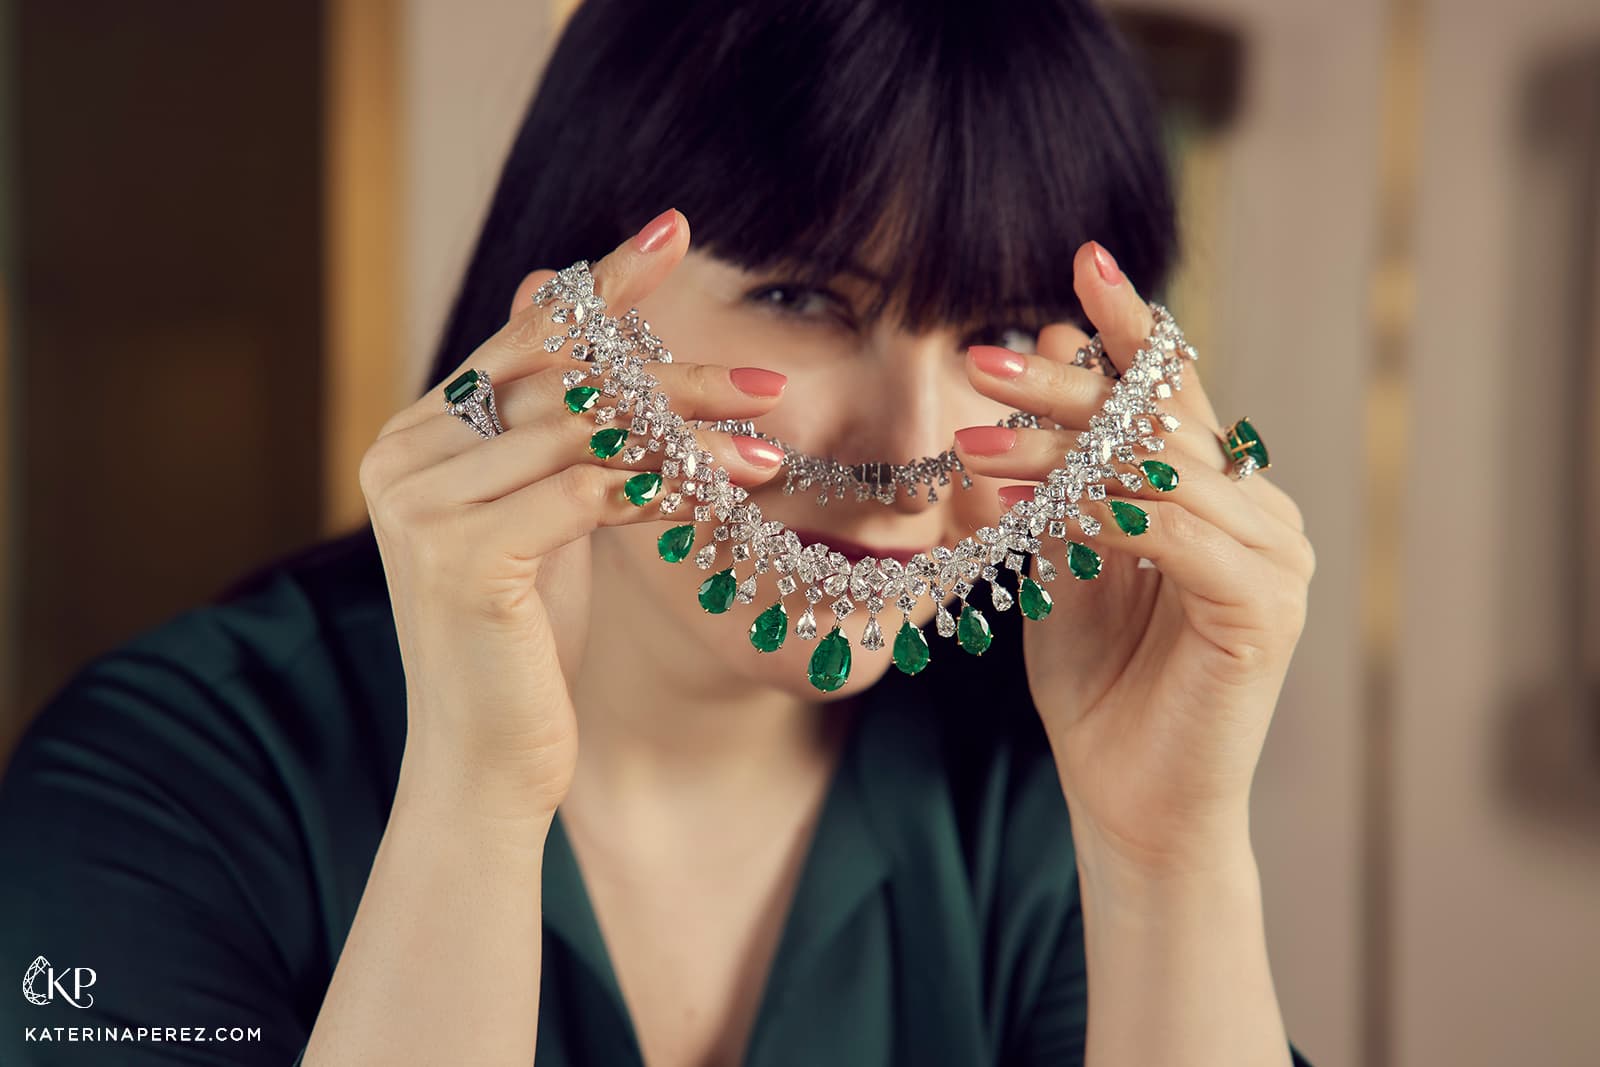 Katerina Perez showcases a pear-shaped emerald and diamond necklace by Bayt Damas